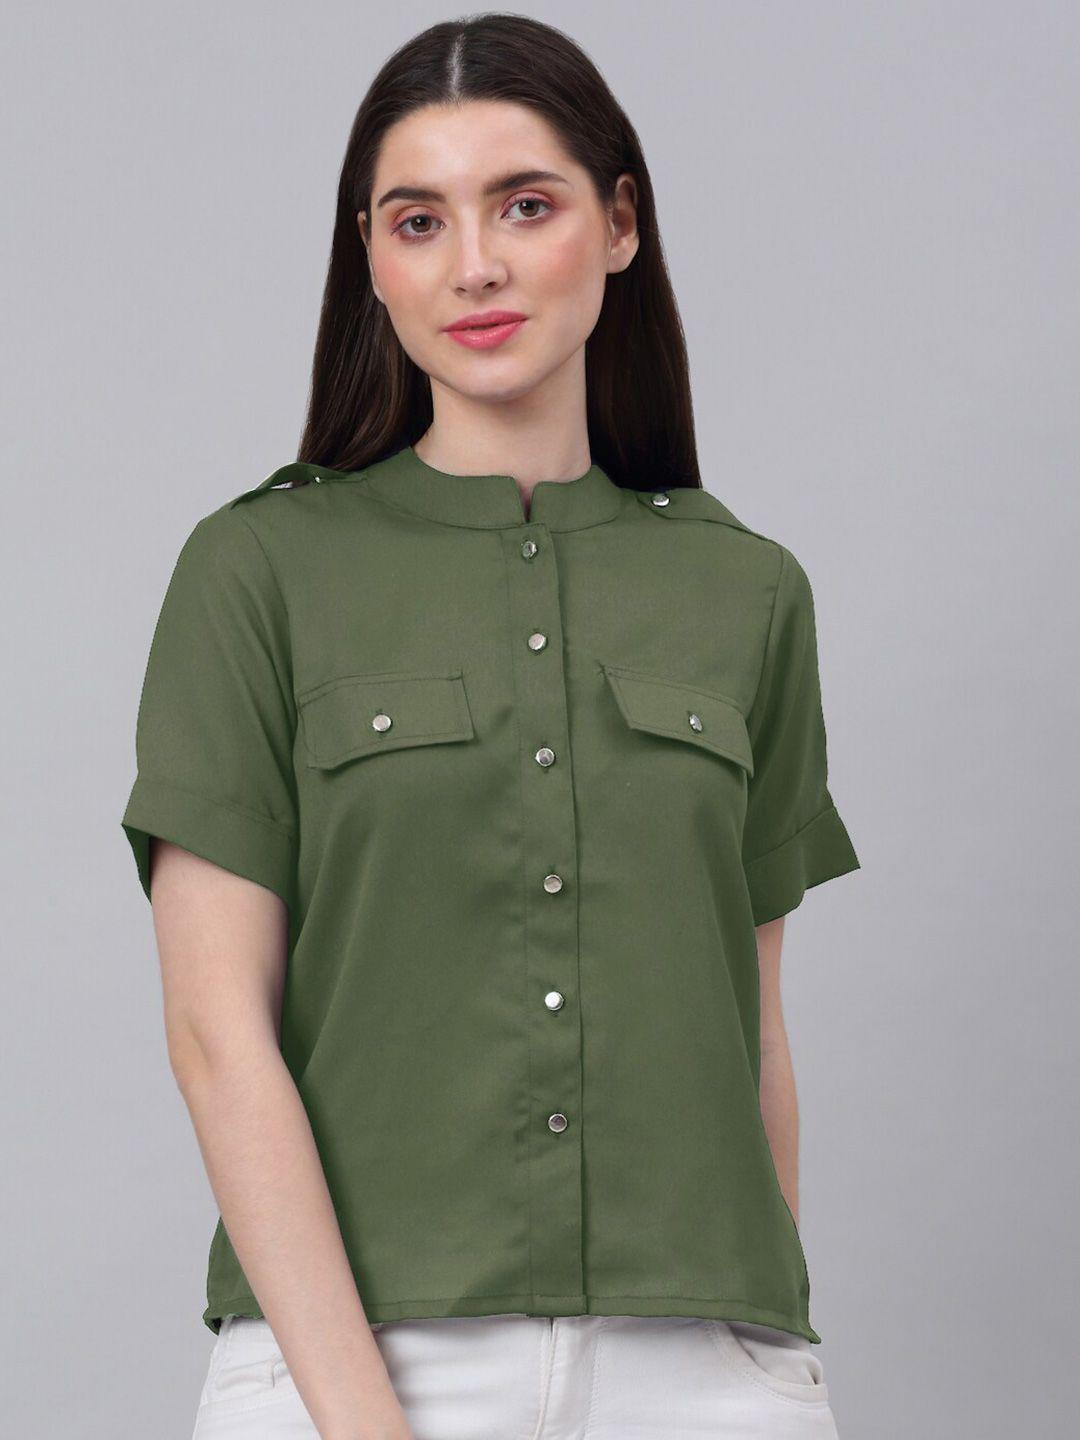 neudis olive green solid crepe shirt style top